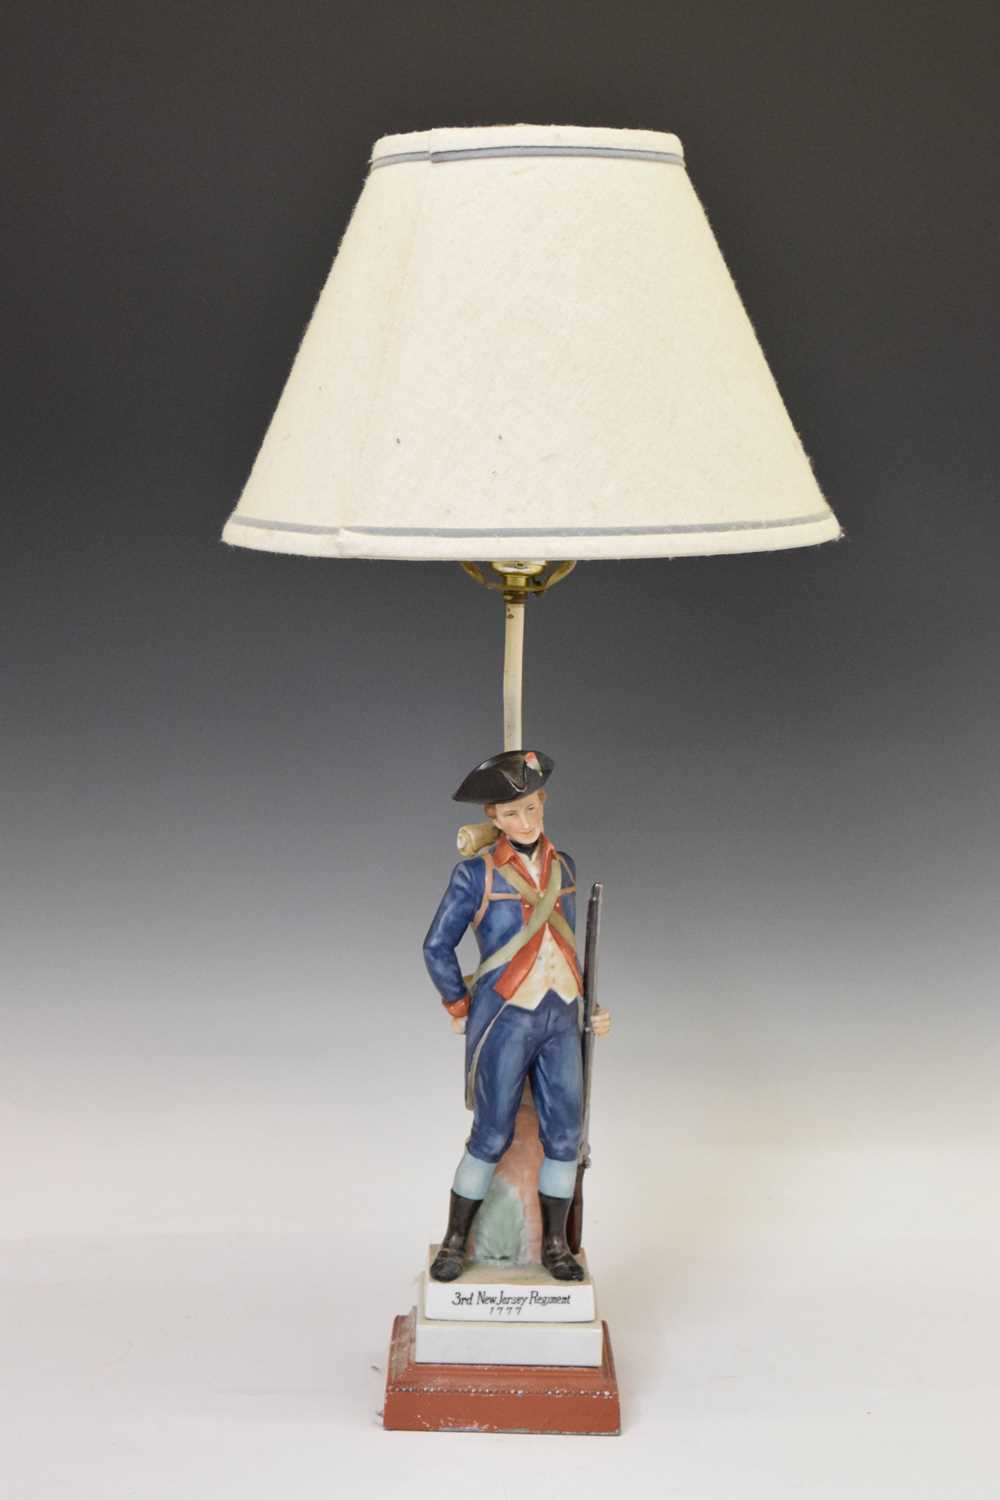 Capodimonte style figural table lamp - Image 2 of 8